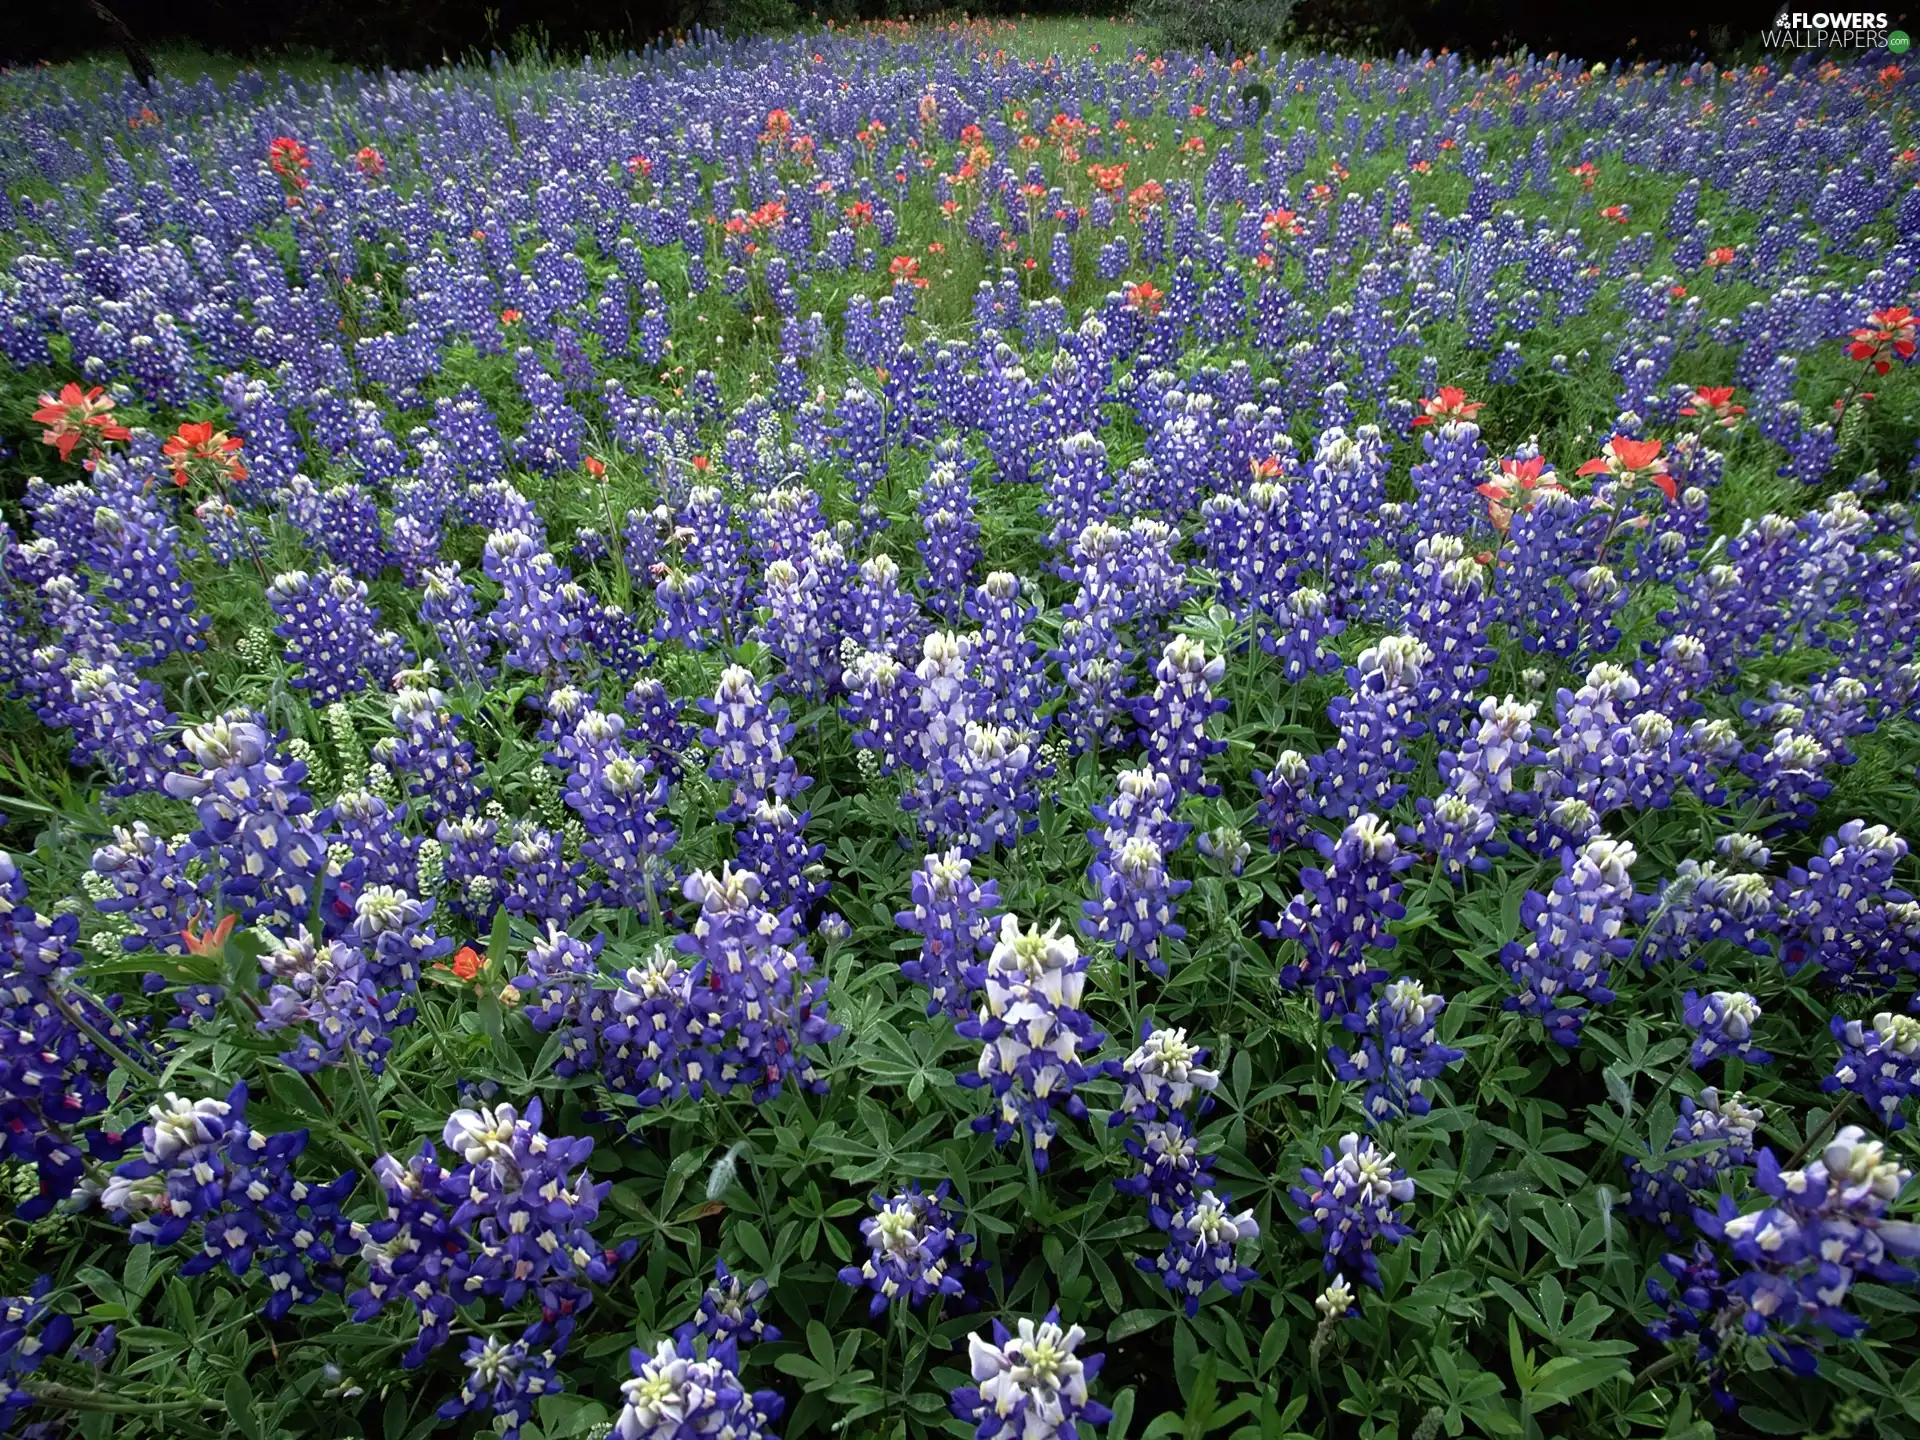 Field, Hill Country, Teksas, Lupin